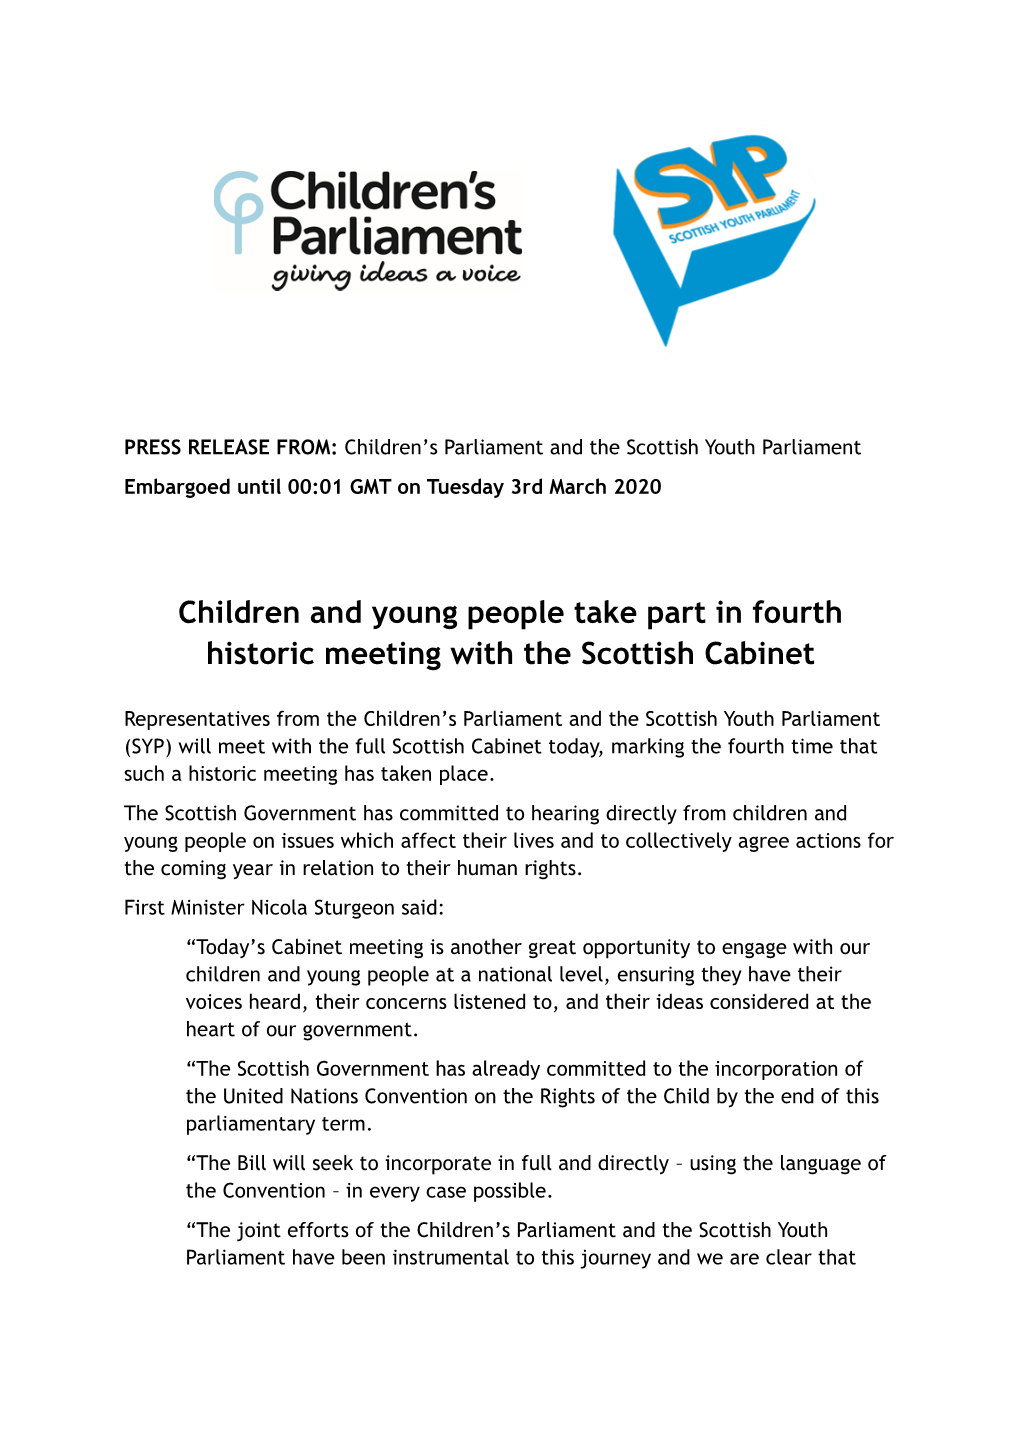 Children and Young People Take Part in Fourth Historic Meeting with the Scottish Cabinet